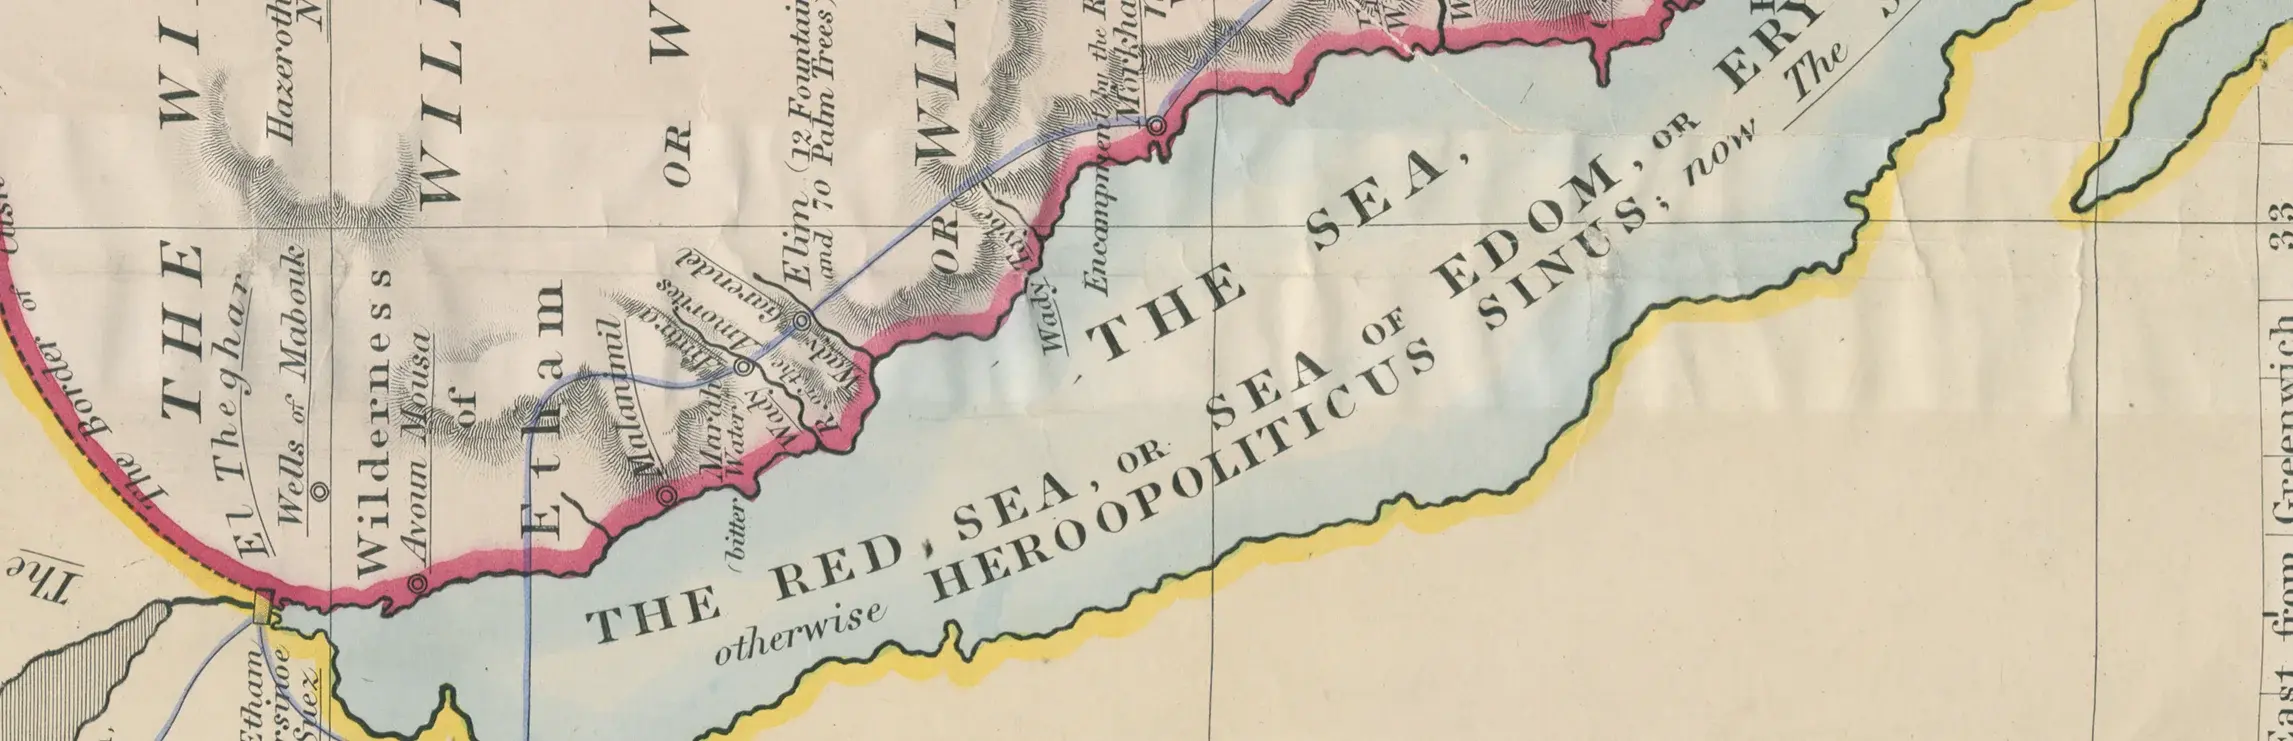 Arrowsmith, Map of the Red Sea